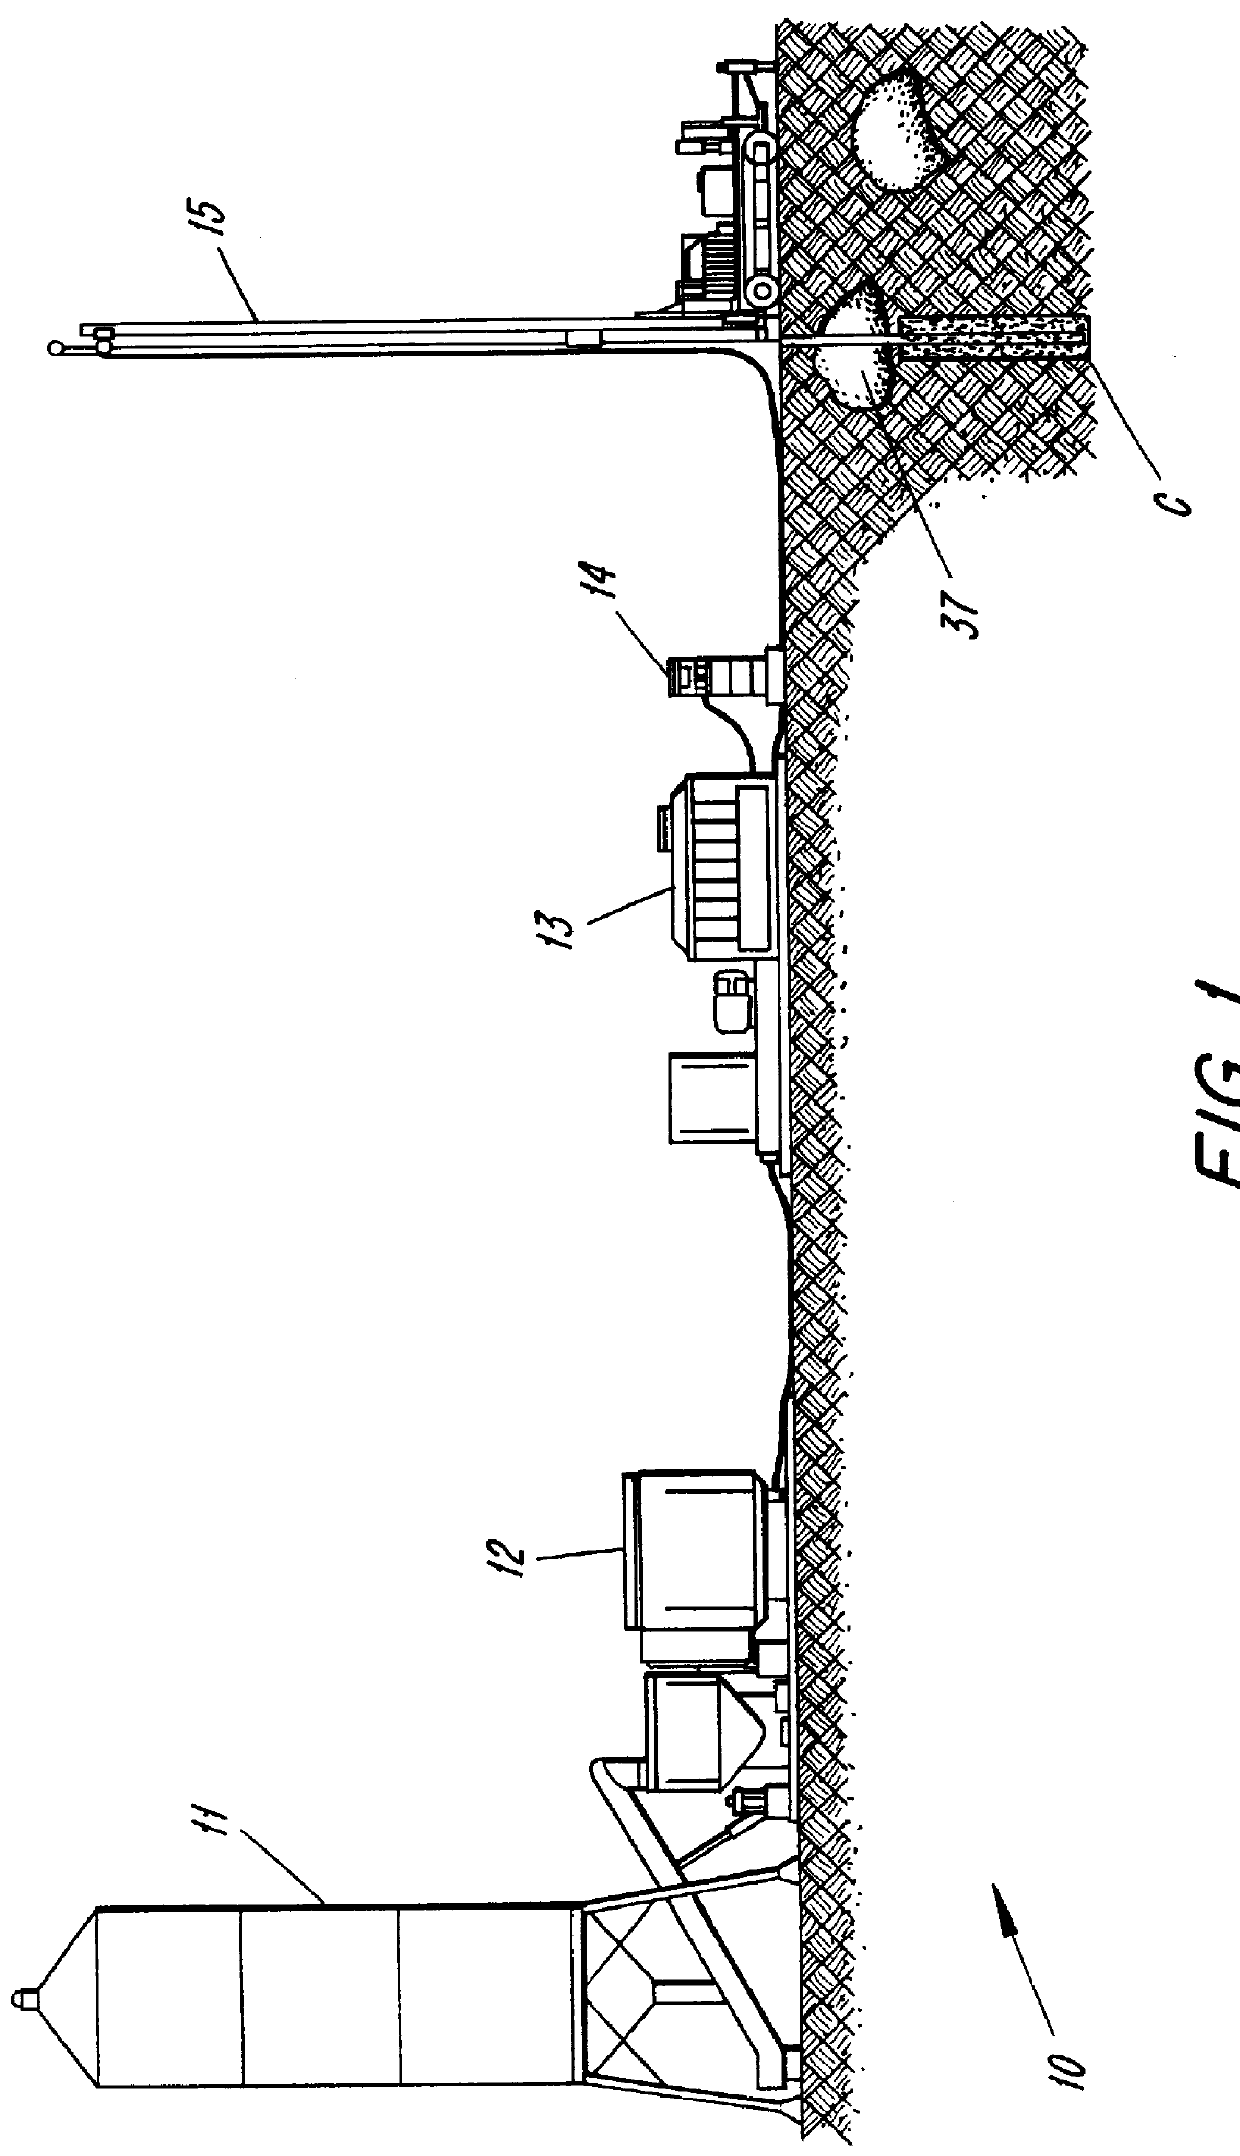 Soil consolidation apparatus, tool and method